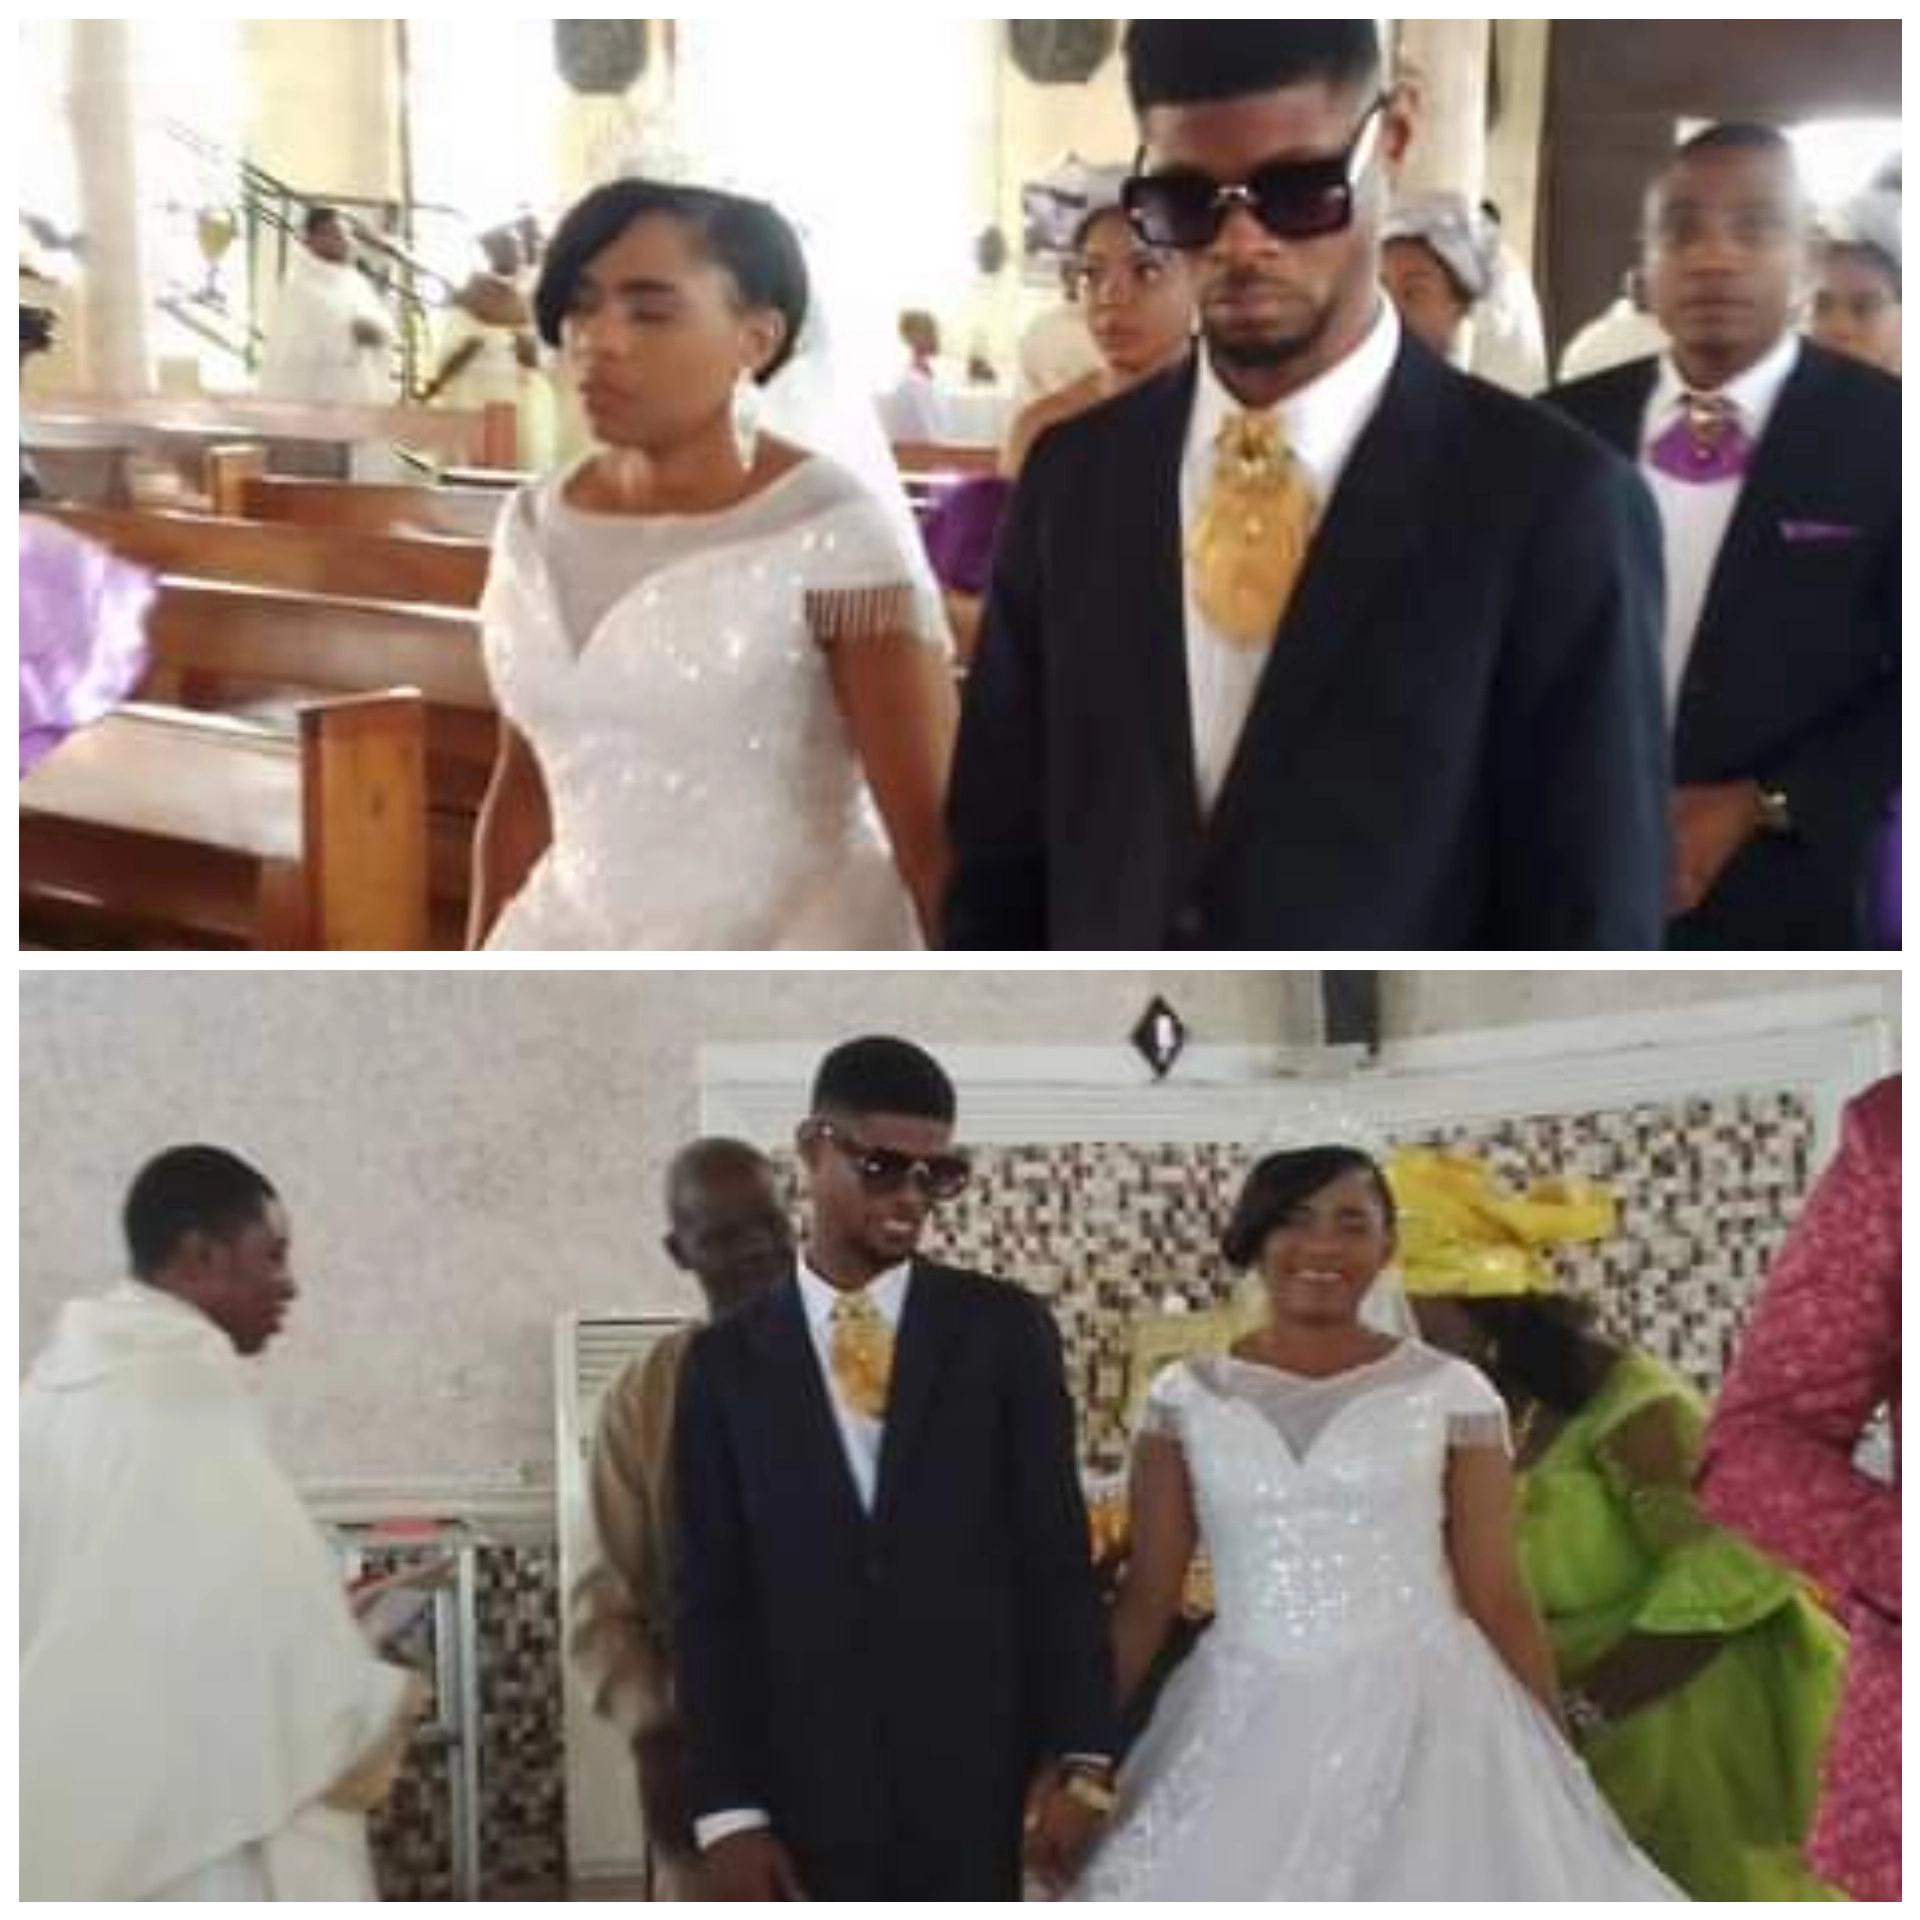 TWO VISUALLY IMPAIRED PERSONS IN ANAMBRA STATE, NIGERIA GET MARRIED IN ROMAN CATHOLIC, TWO VISUALLY IMPAIRED PERSONS IN ANAMBRA STATE, NIGERIA GET MARRIED IN ROMAN CATHOLIC, INFINITY LOADED